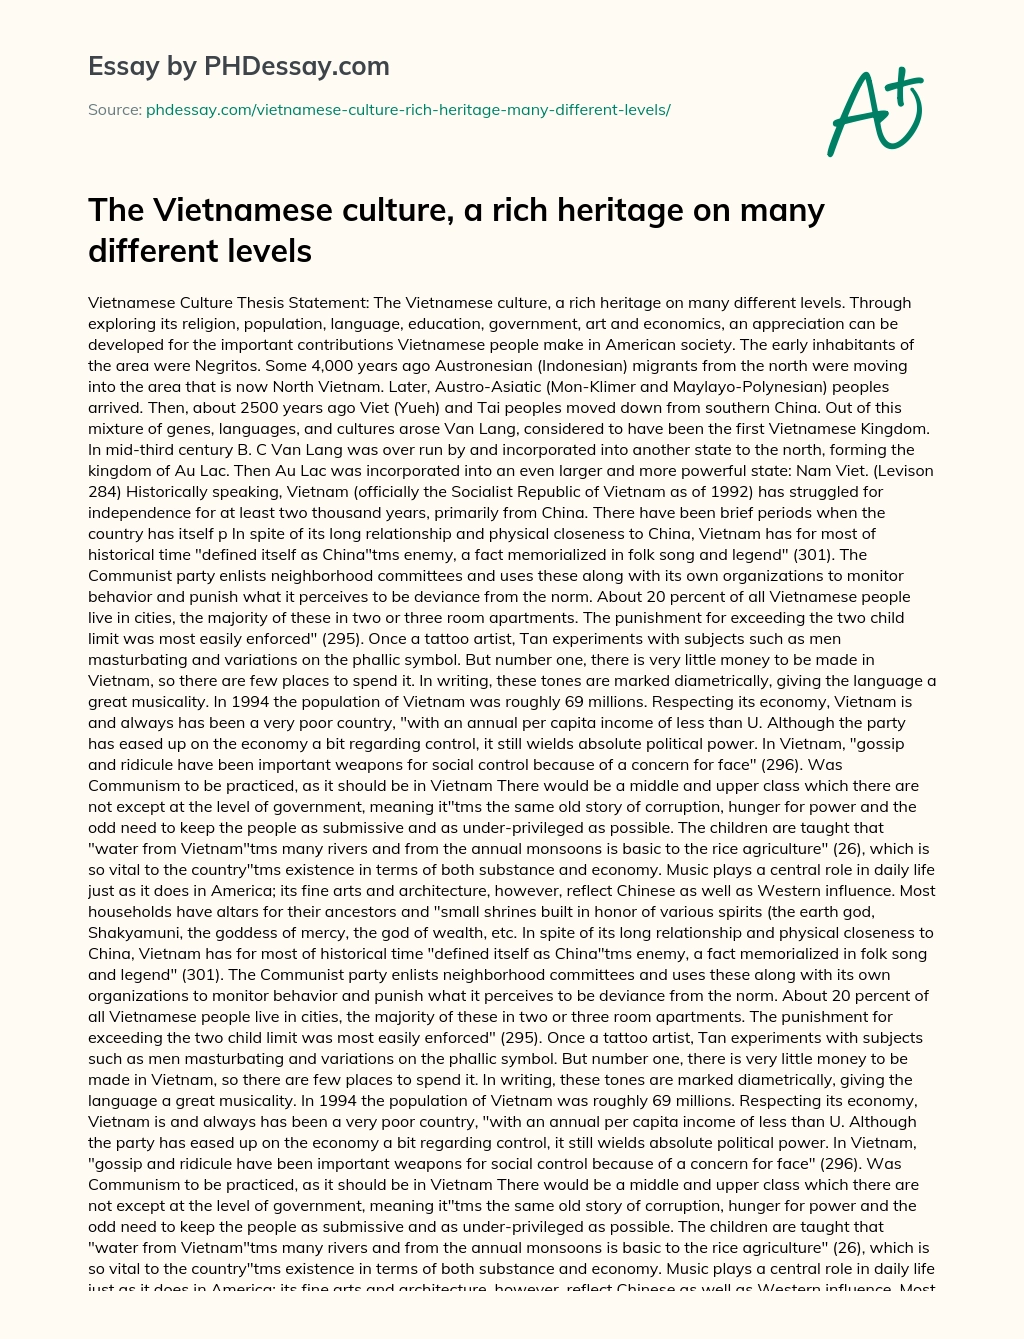 The Vietnamese culture, a rich heritage on many different levels essay